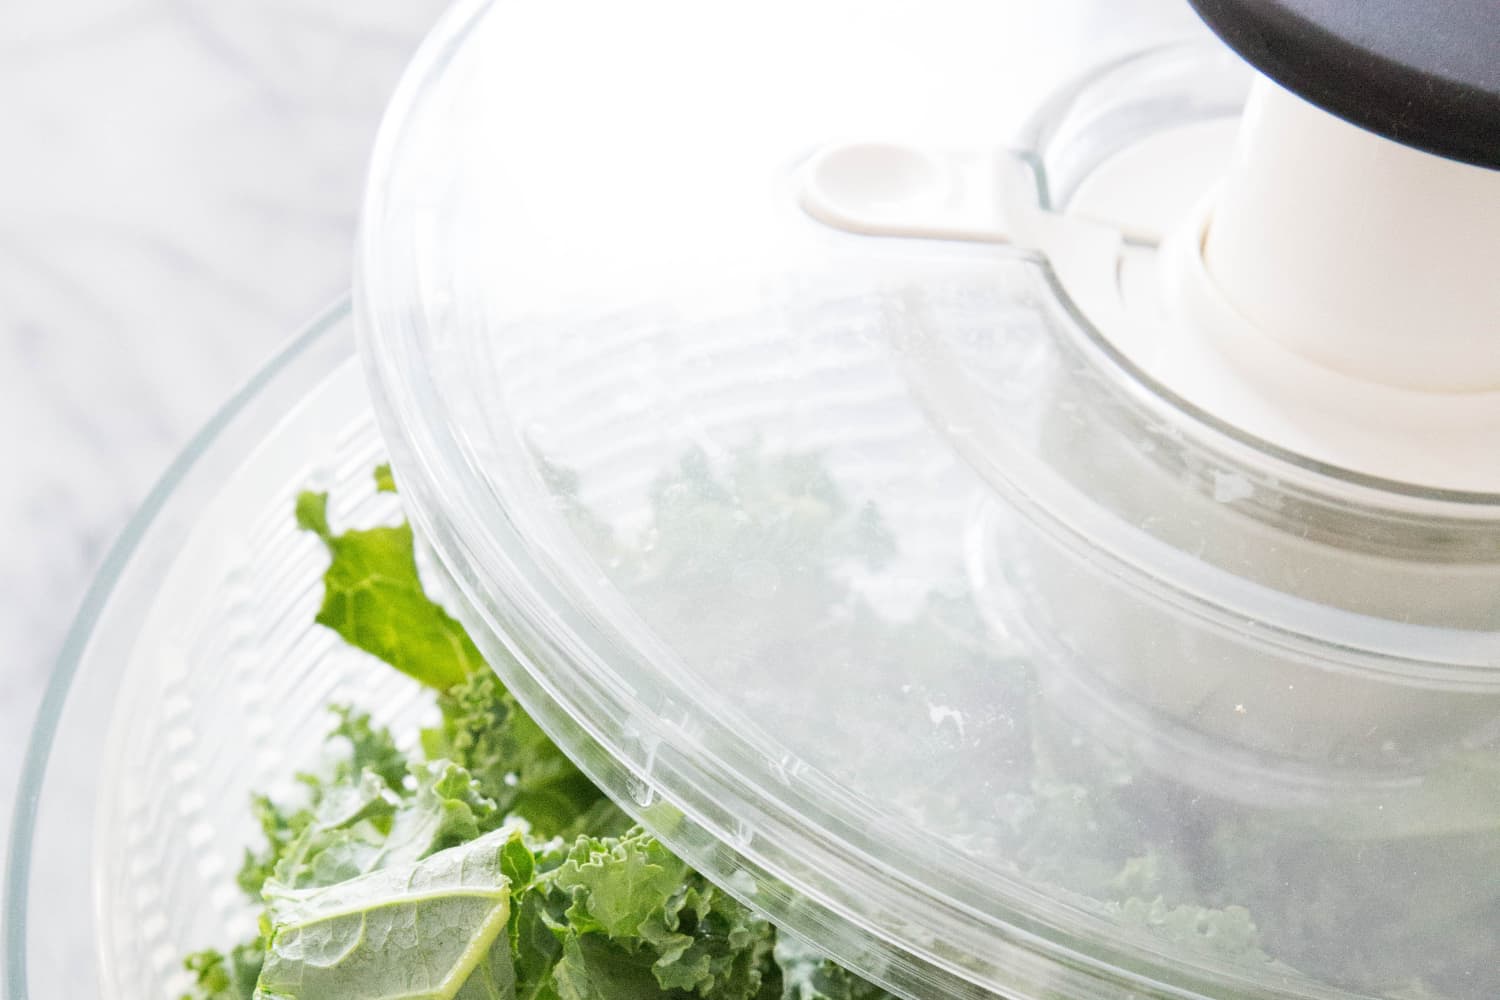 This surprisingly stylish salad container will keep your greens fresh all  day for $15